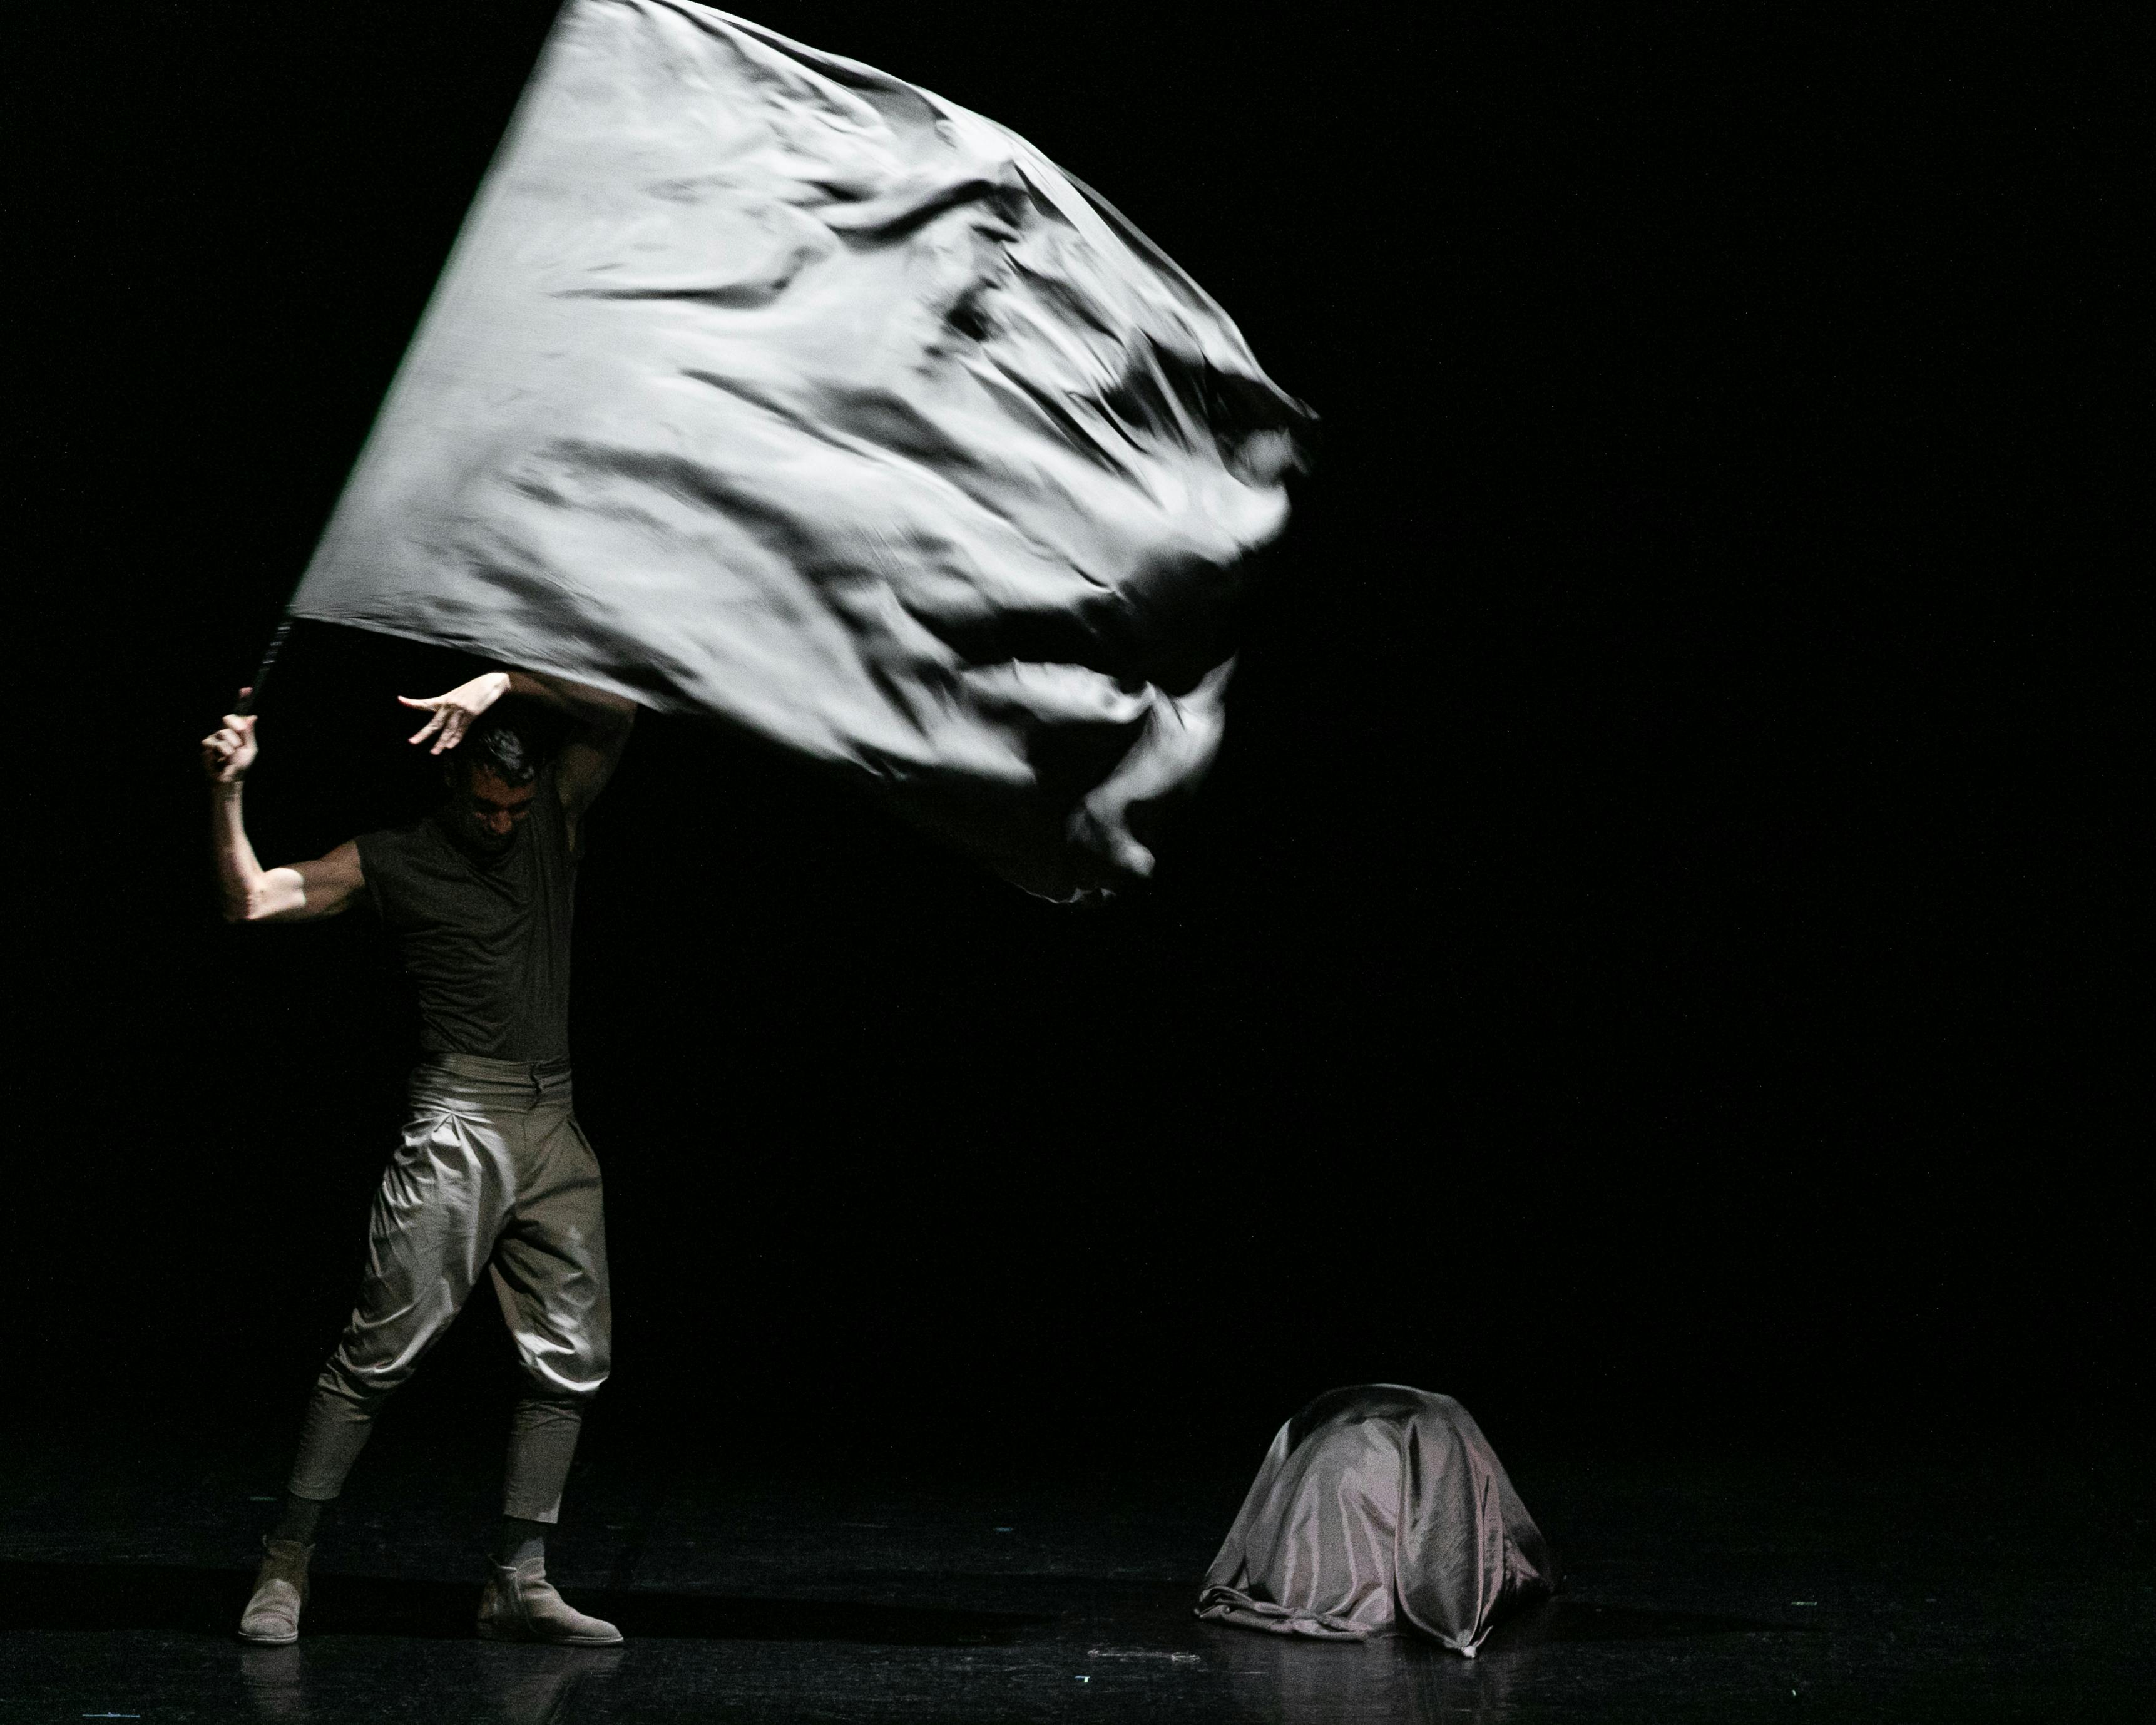 The artist performs on stage wearing dark clothes and waving a grey flag